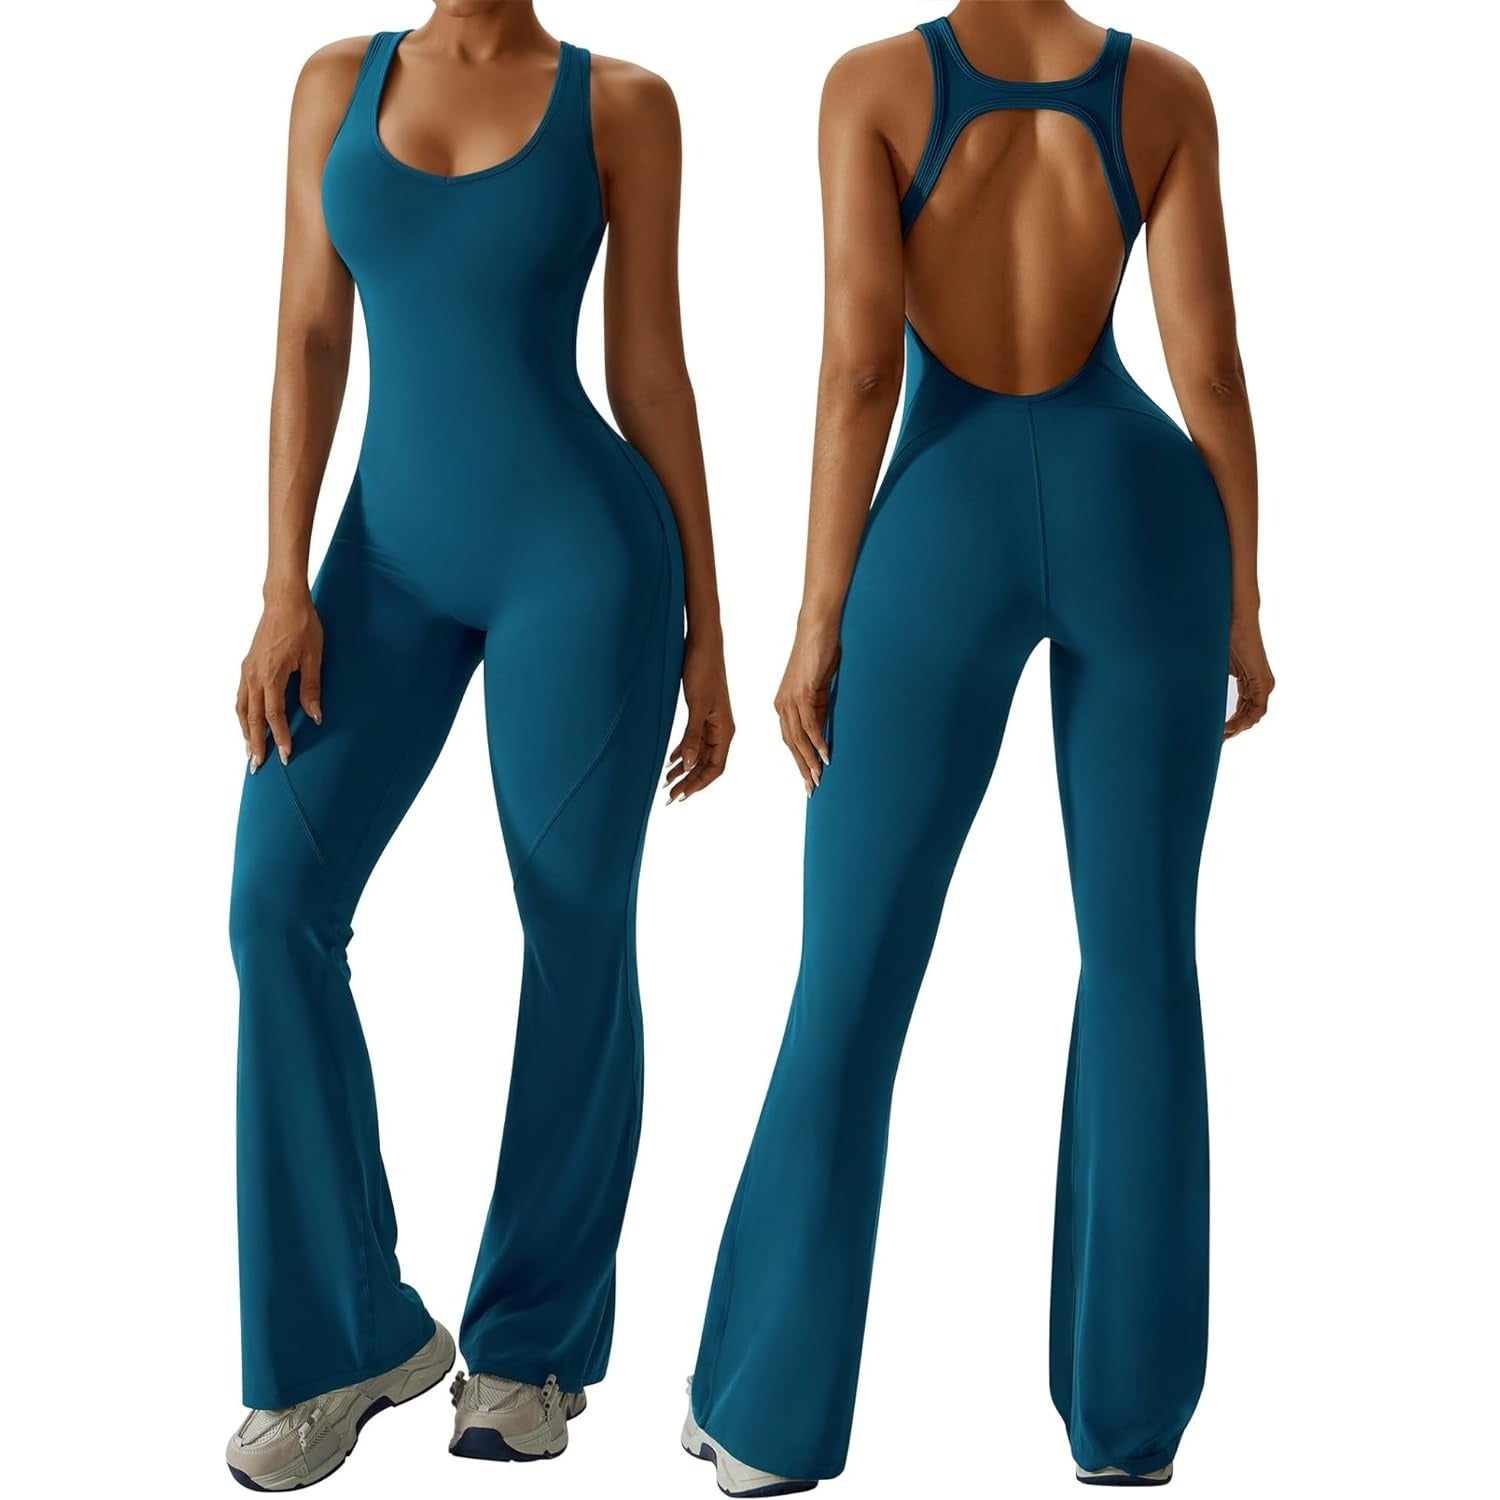 Womens Flare Jumpsuit with Bra Tummy Control Cutout Romper Workout Outfit Sleeveless Unitard One Piece Backless Bodysuit